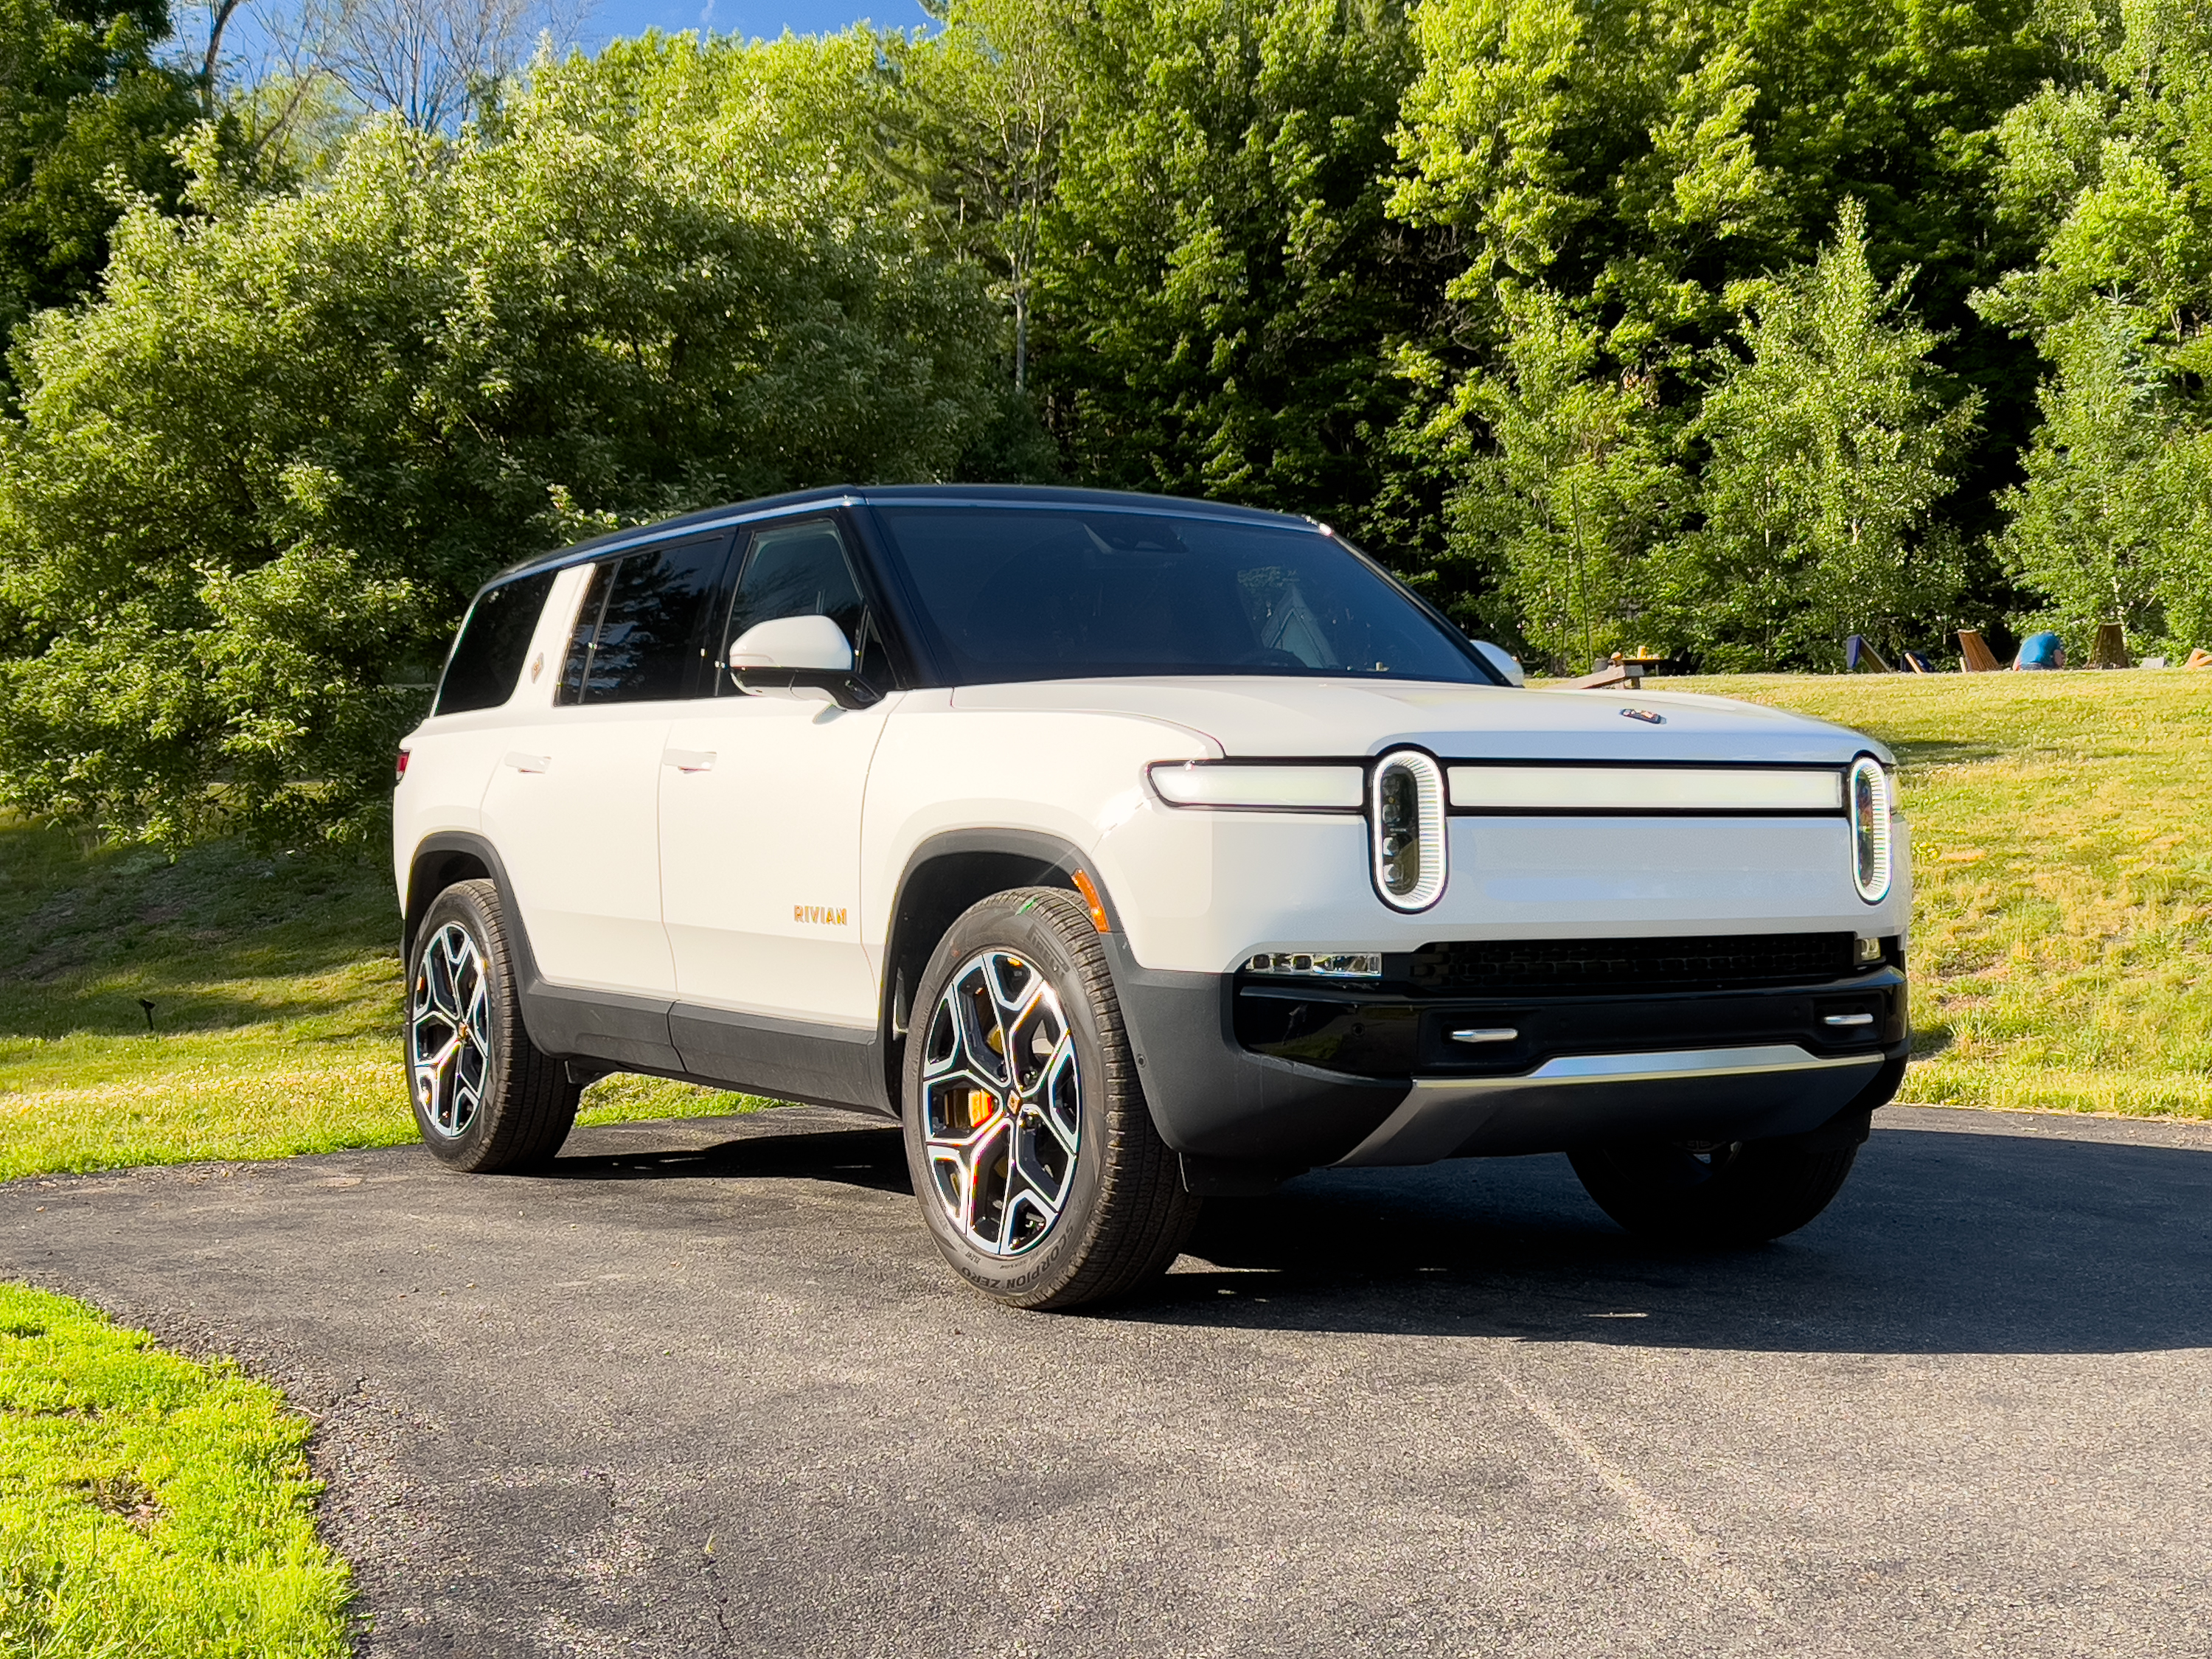 Rivian R1S: A Powerful Electric SUV Ready To Take On Europe - Yet Availability Will Take Time